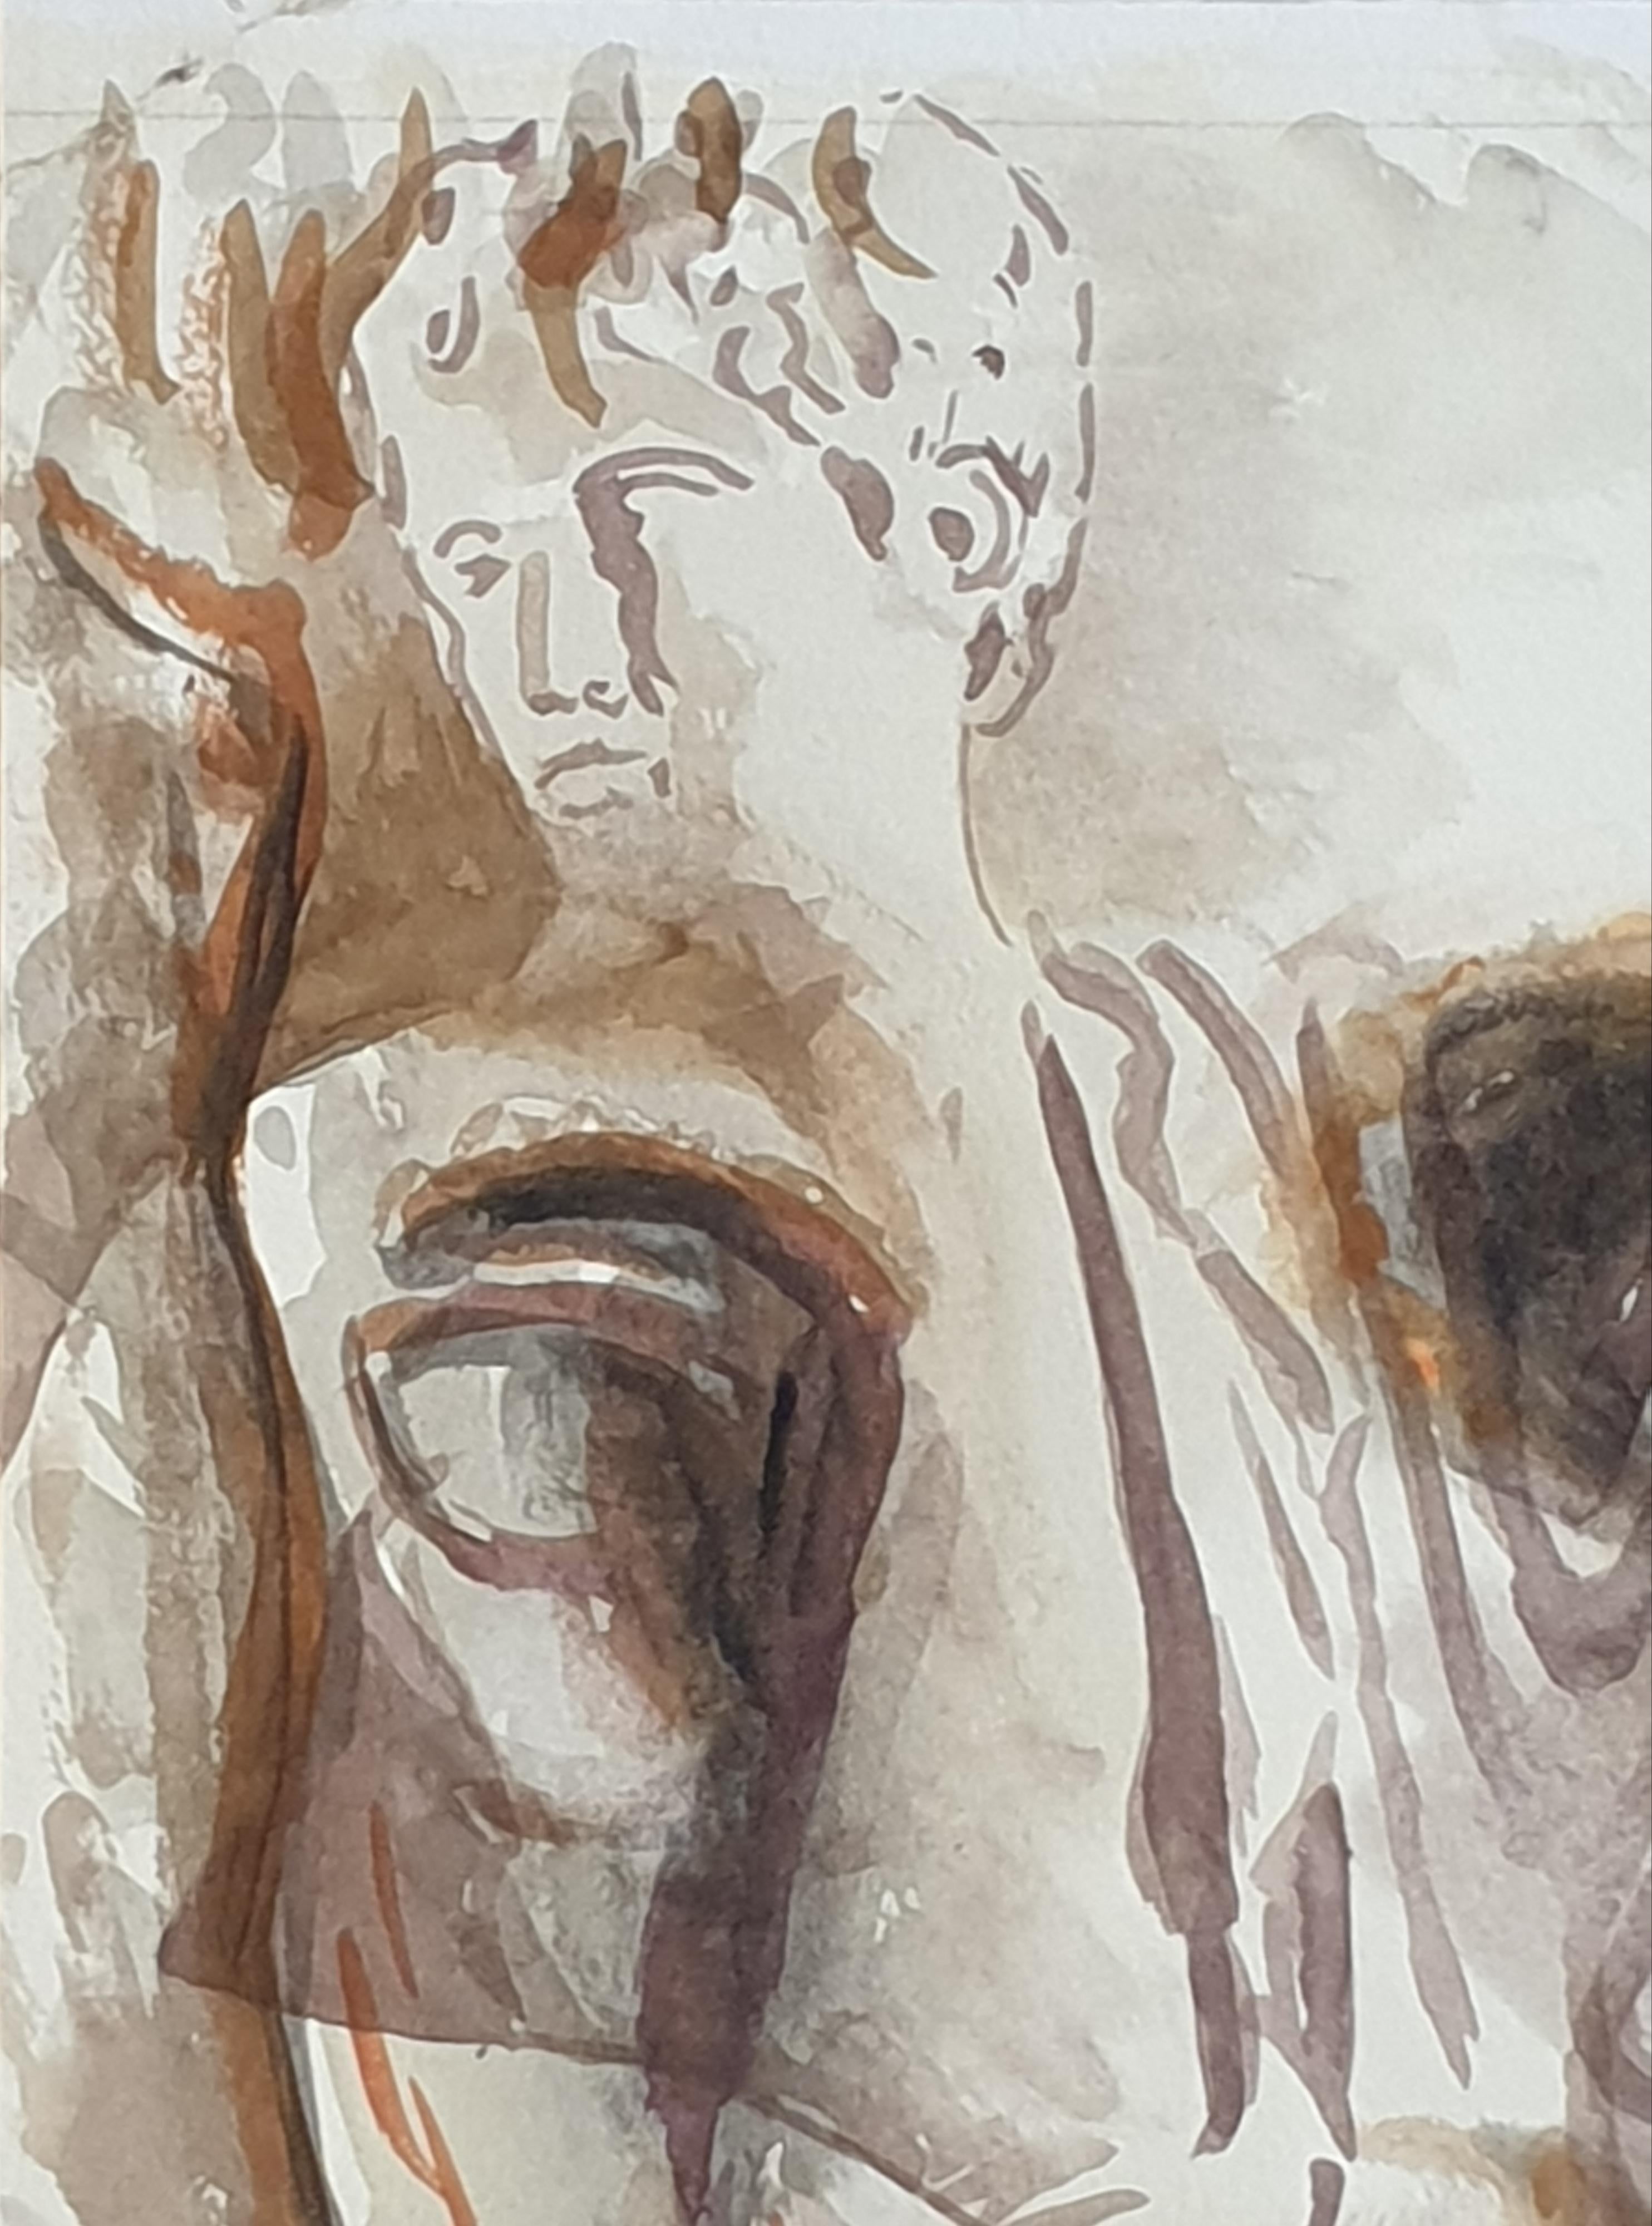 Late 20th century gouache and watercolour on paper of a Roman-Graeco head and two figures by British artist Derek Carruthers.  Signed bottom right and dated Feb 1986 to the reverse.

An imposing painting of a colossal classical heroic Graeco-Roman